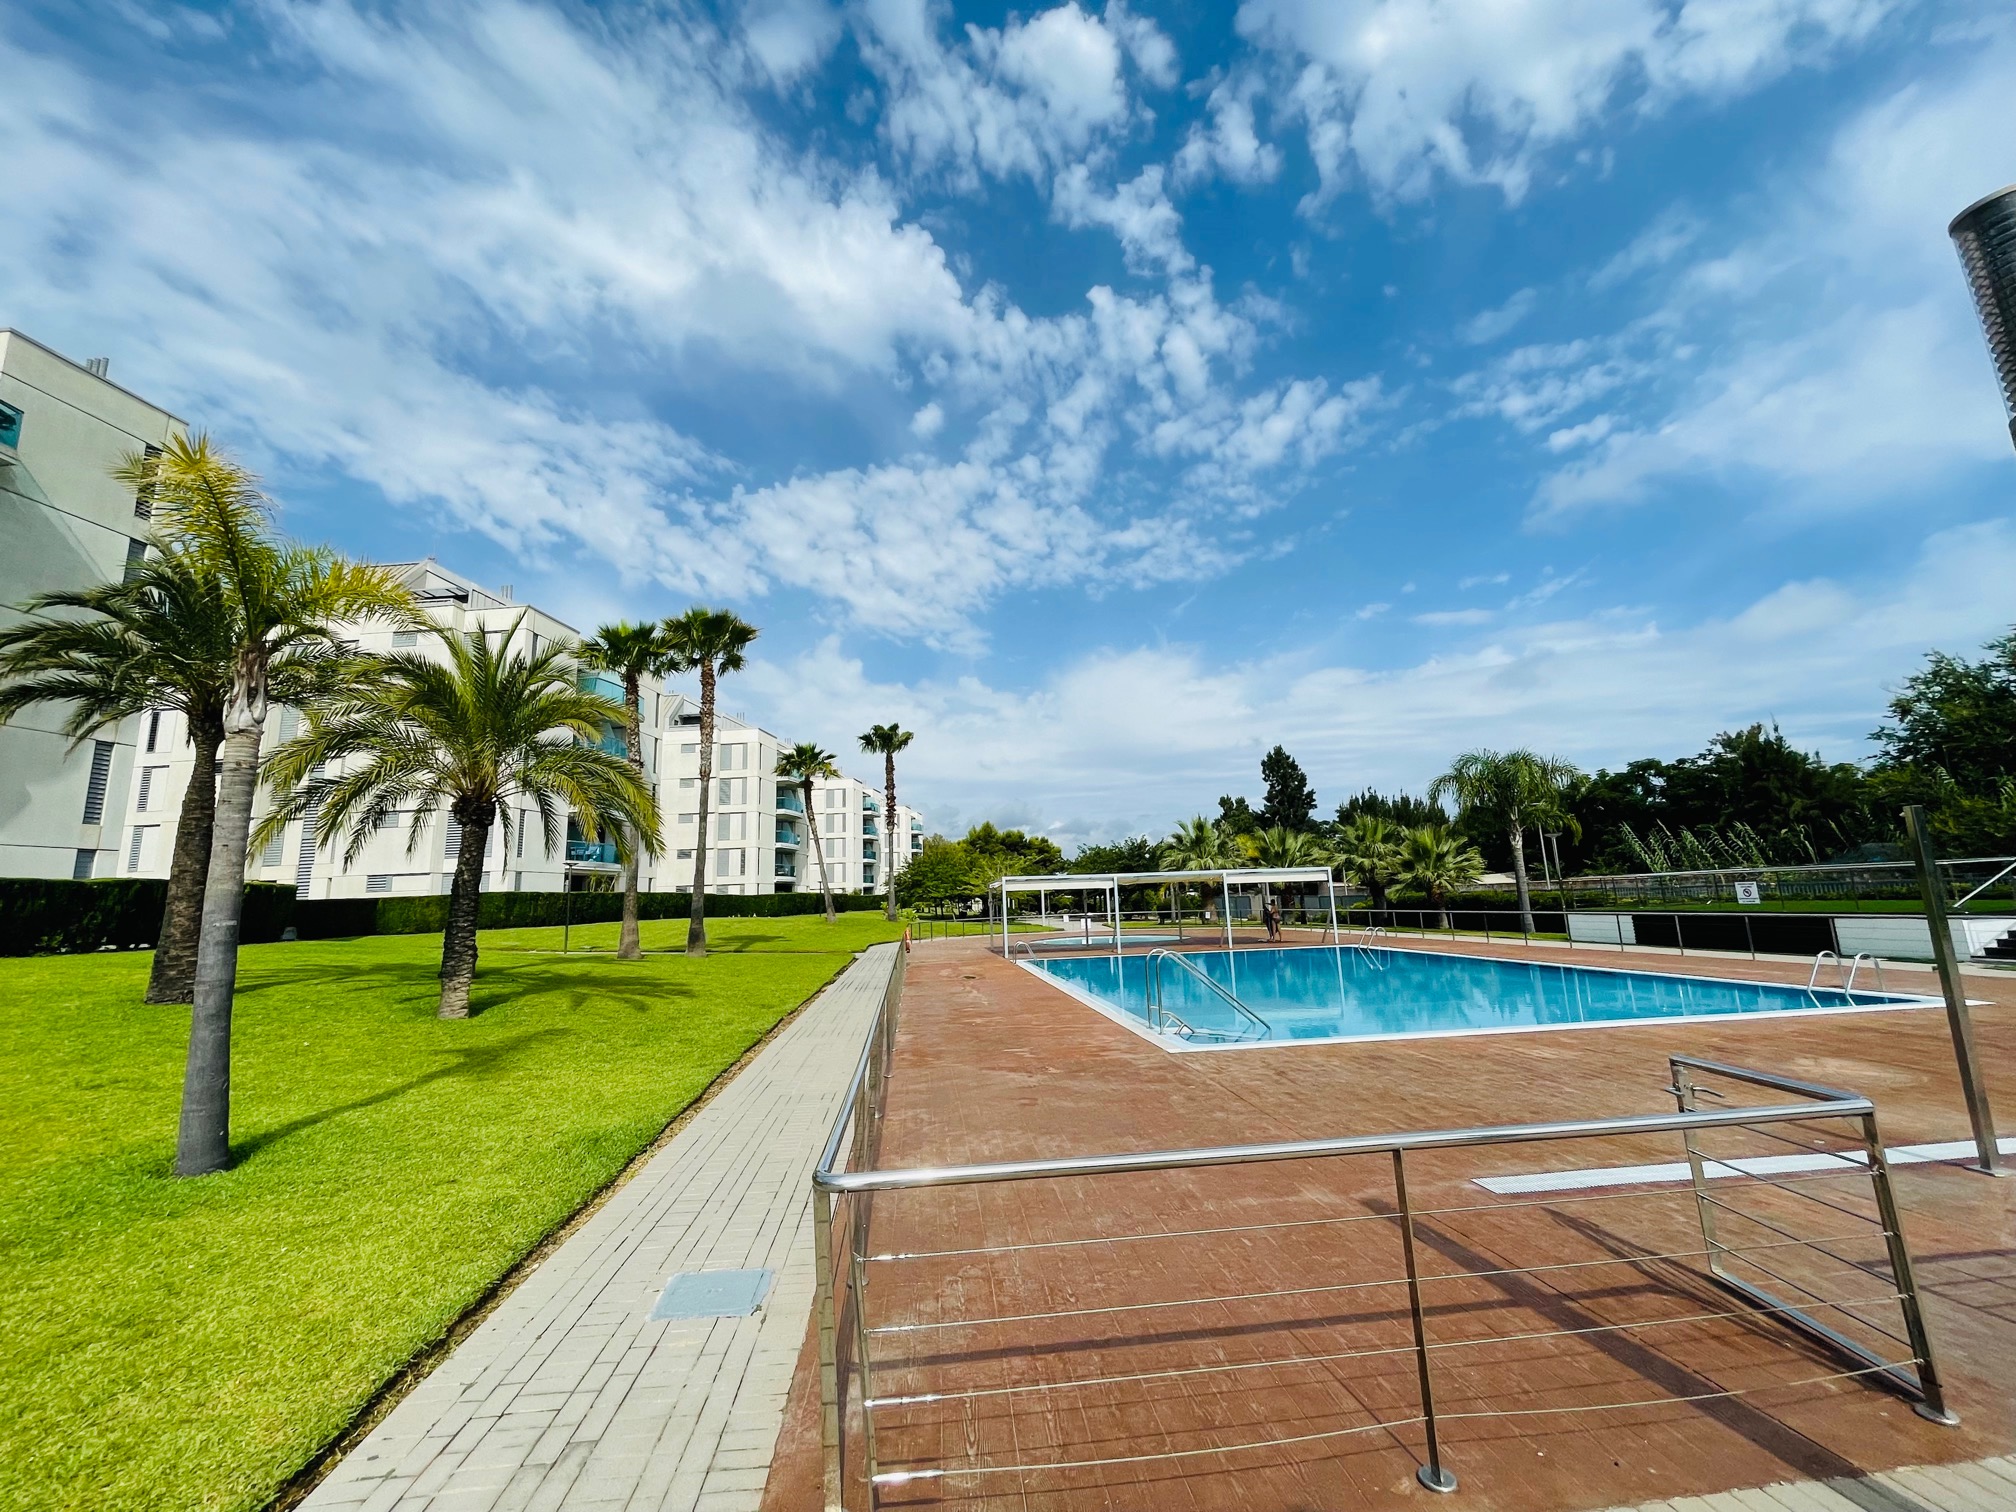 Vergel. Flat in perfect condition, gym, indoor and outdoor pool and garage for sale.